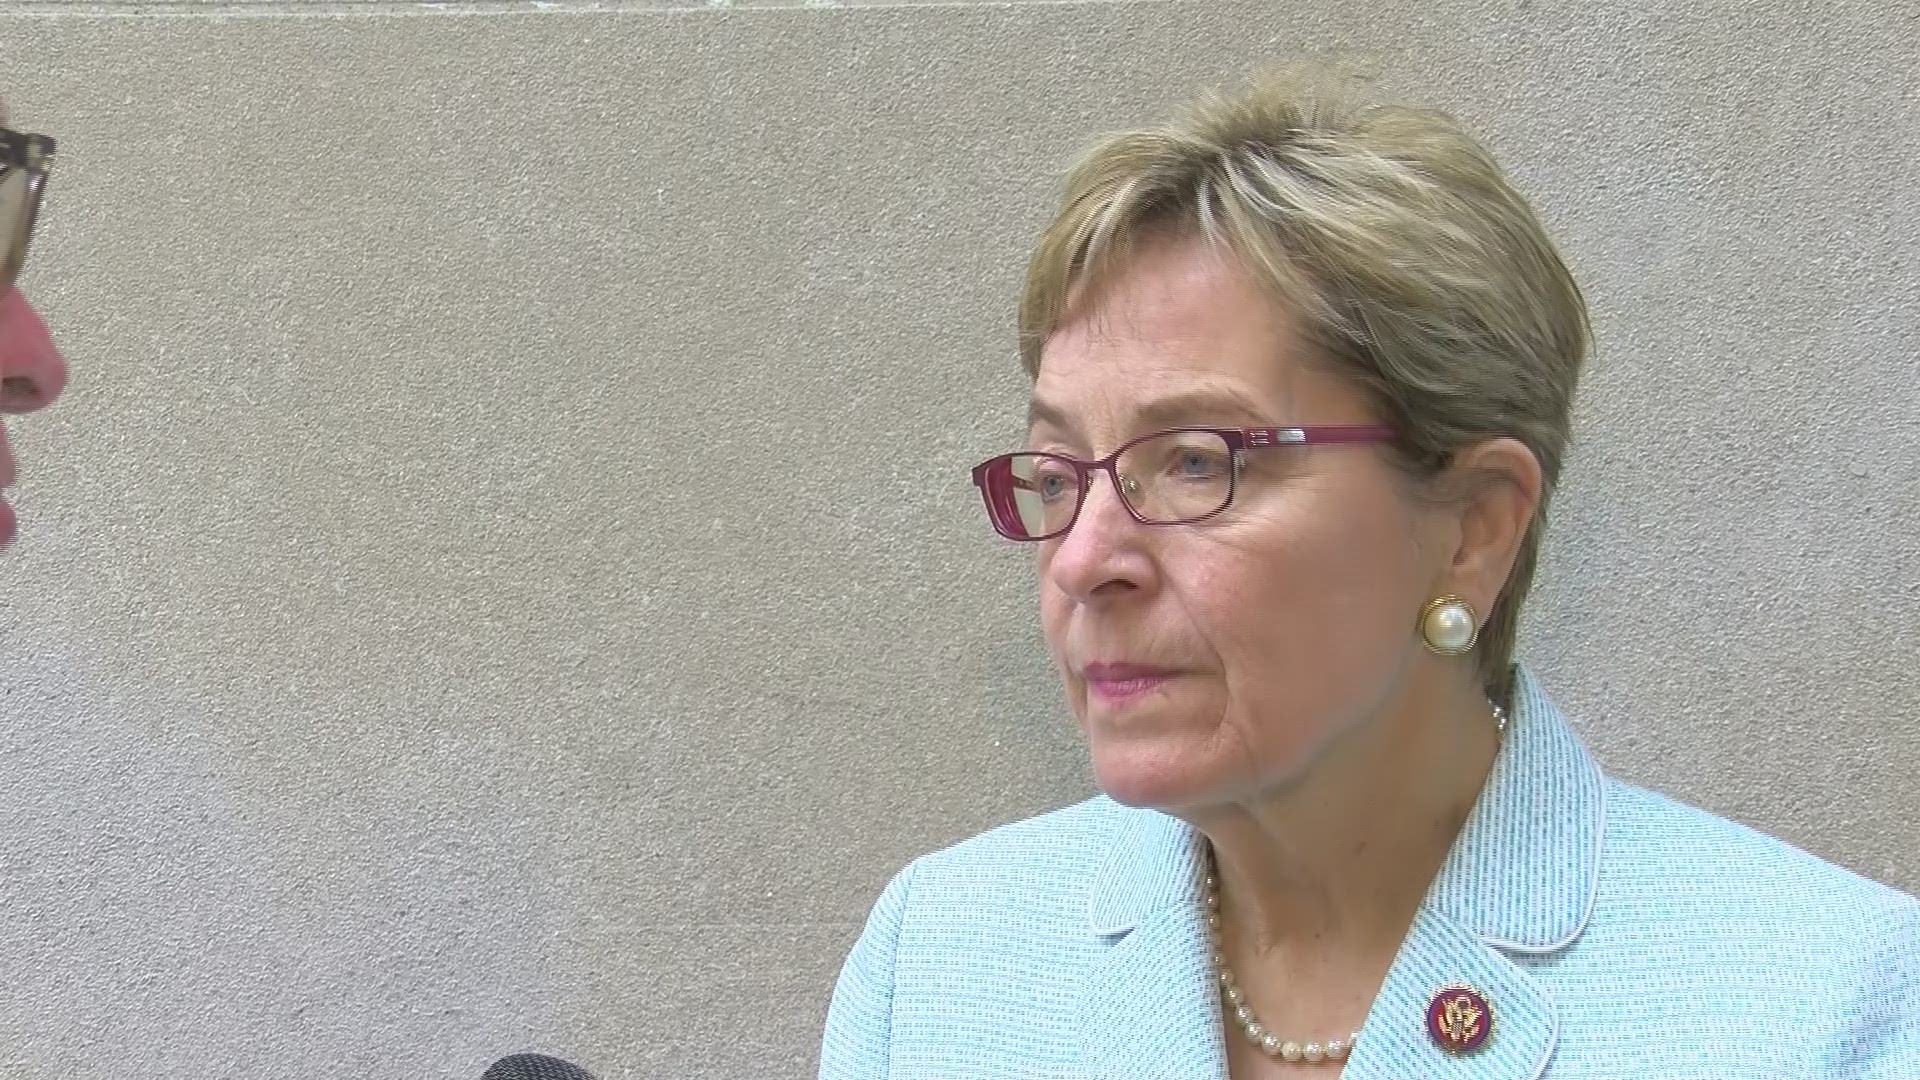 U.S. Rep. Marcy Kaptur, D-Toledo, says one of the main issues regarding the phone call between President Trump and the Ukranian leader is national security.